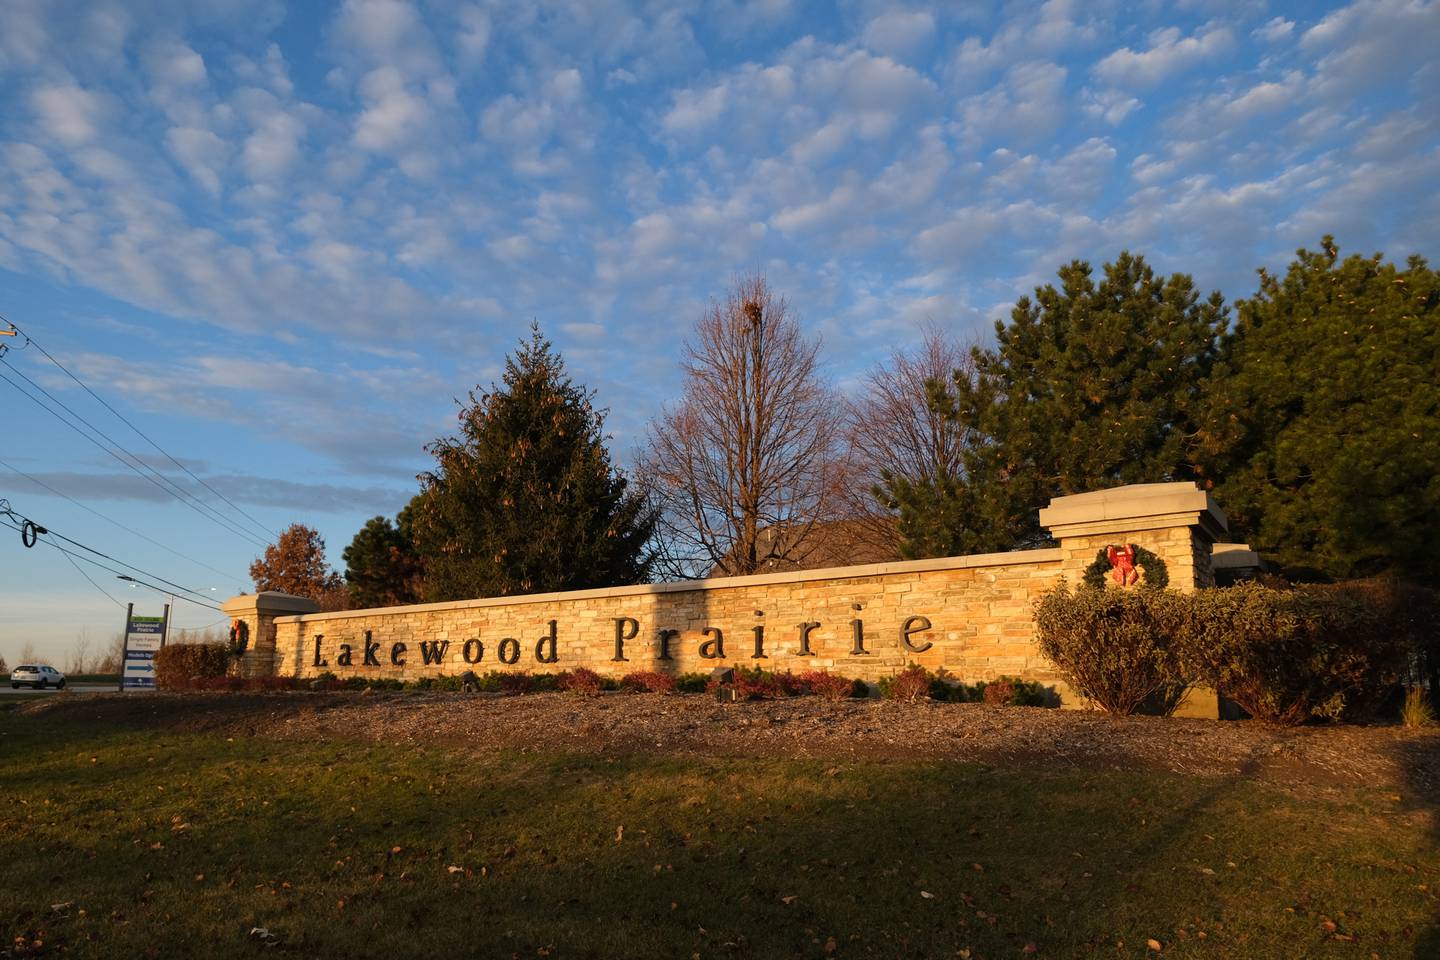 Redwood Apartment Neighborhoods is looking to build apartments in the Lakewood Prairie subdivision